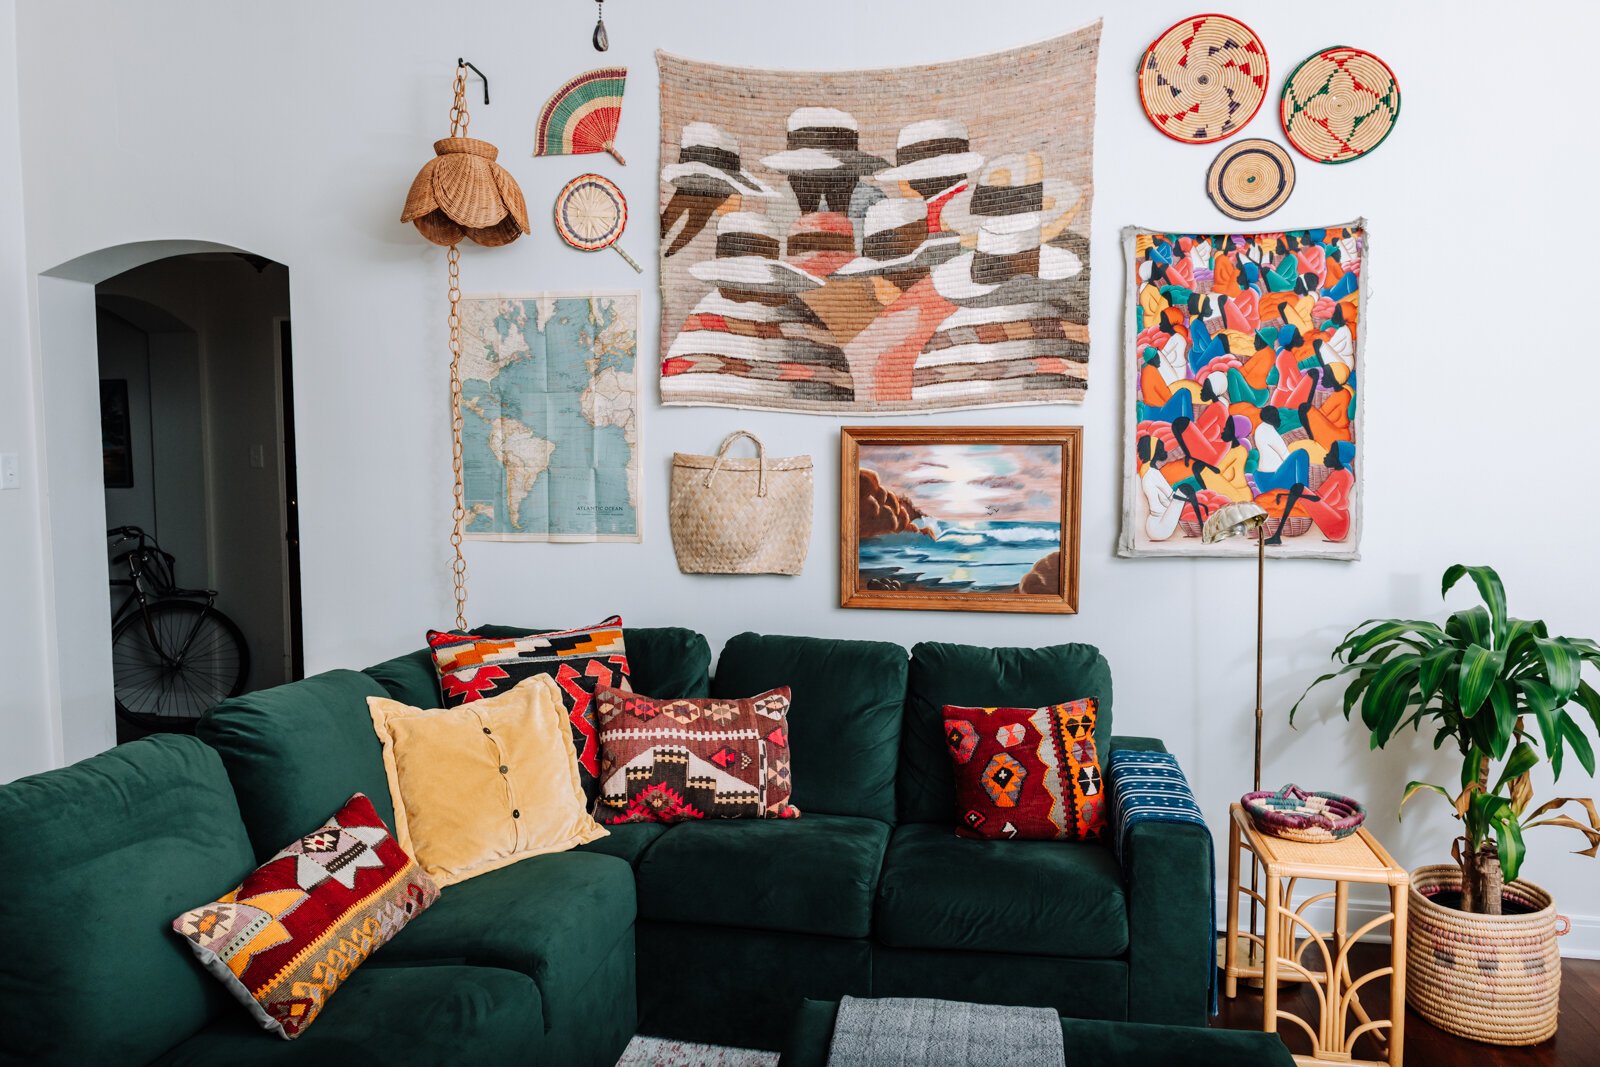 The living room features a variety of textures, artwork, gifts, and vintage items in the apartment of Jamie Curtis on Edgewater Ave. in the Lakeside Park neighborhood.